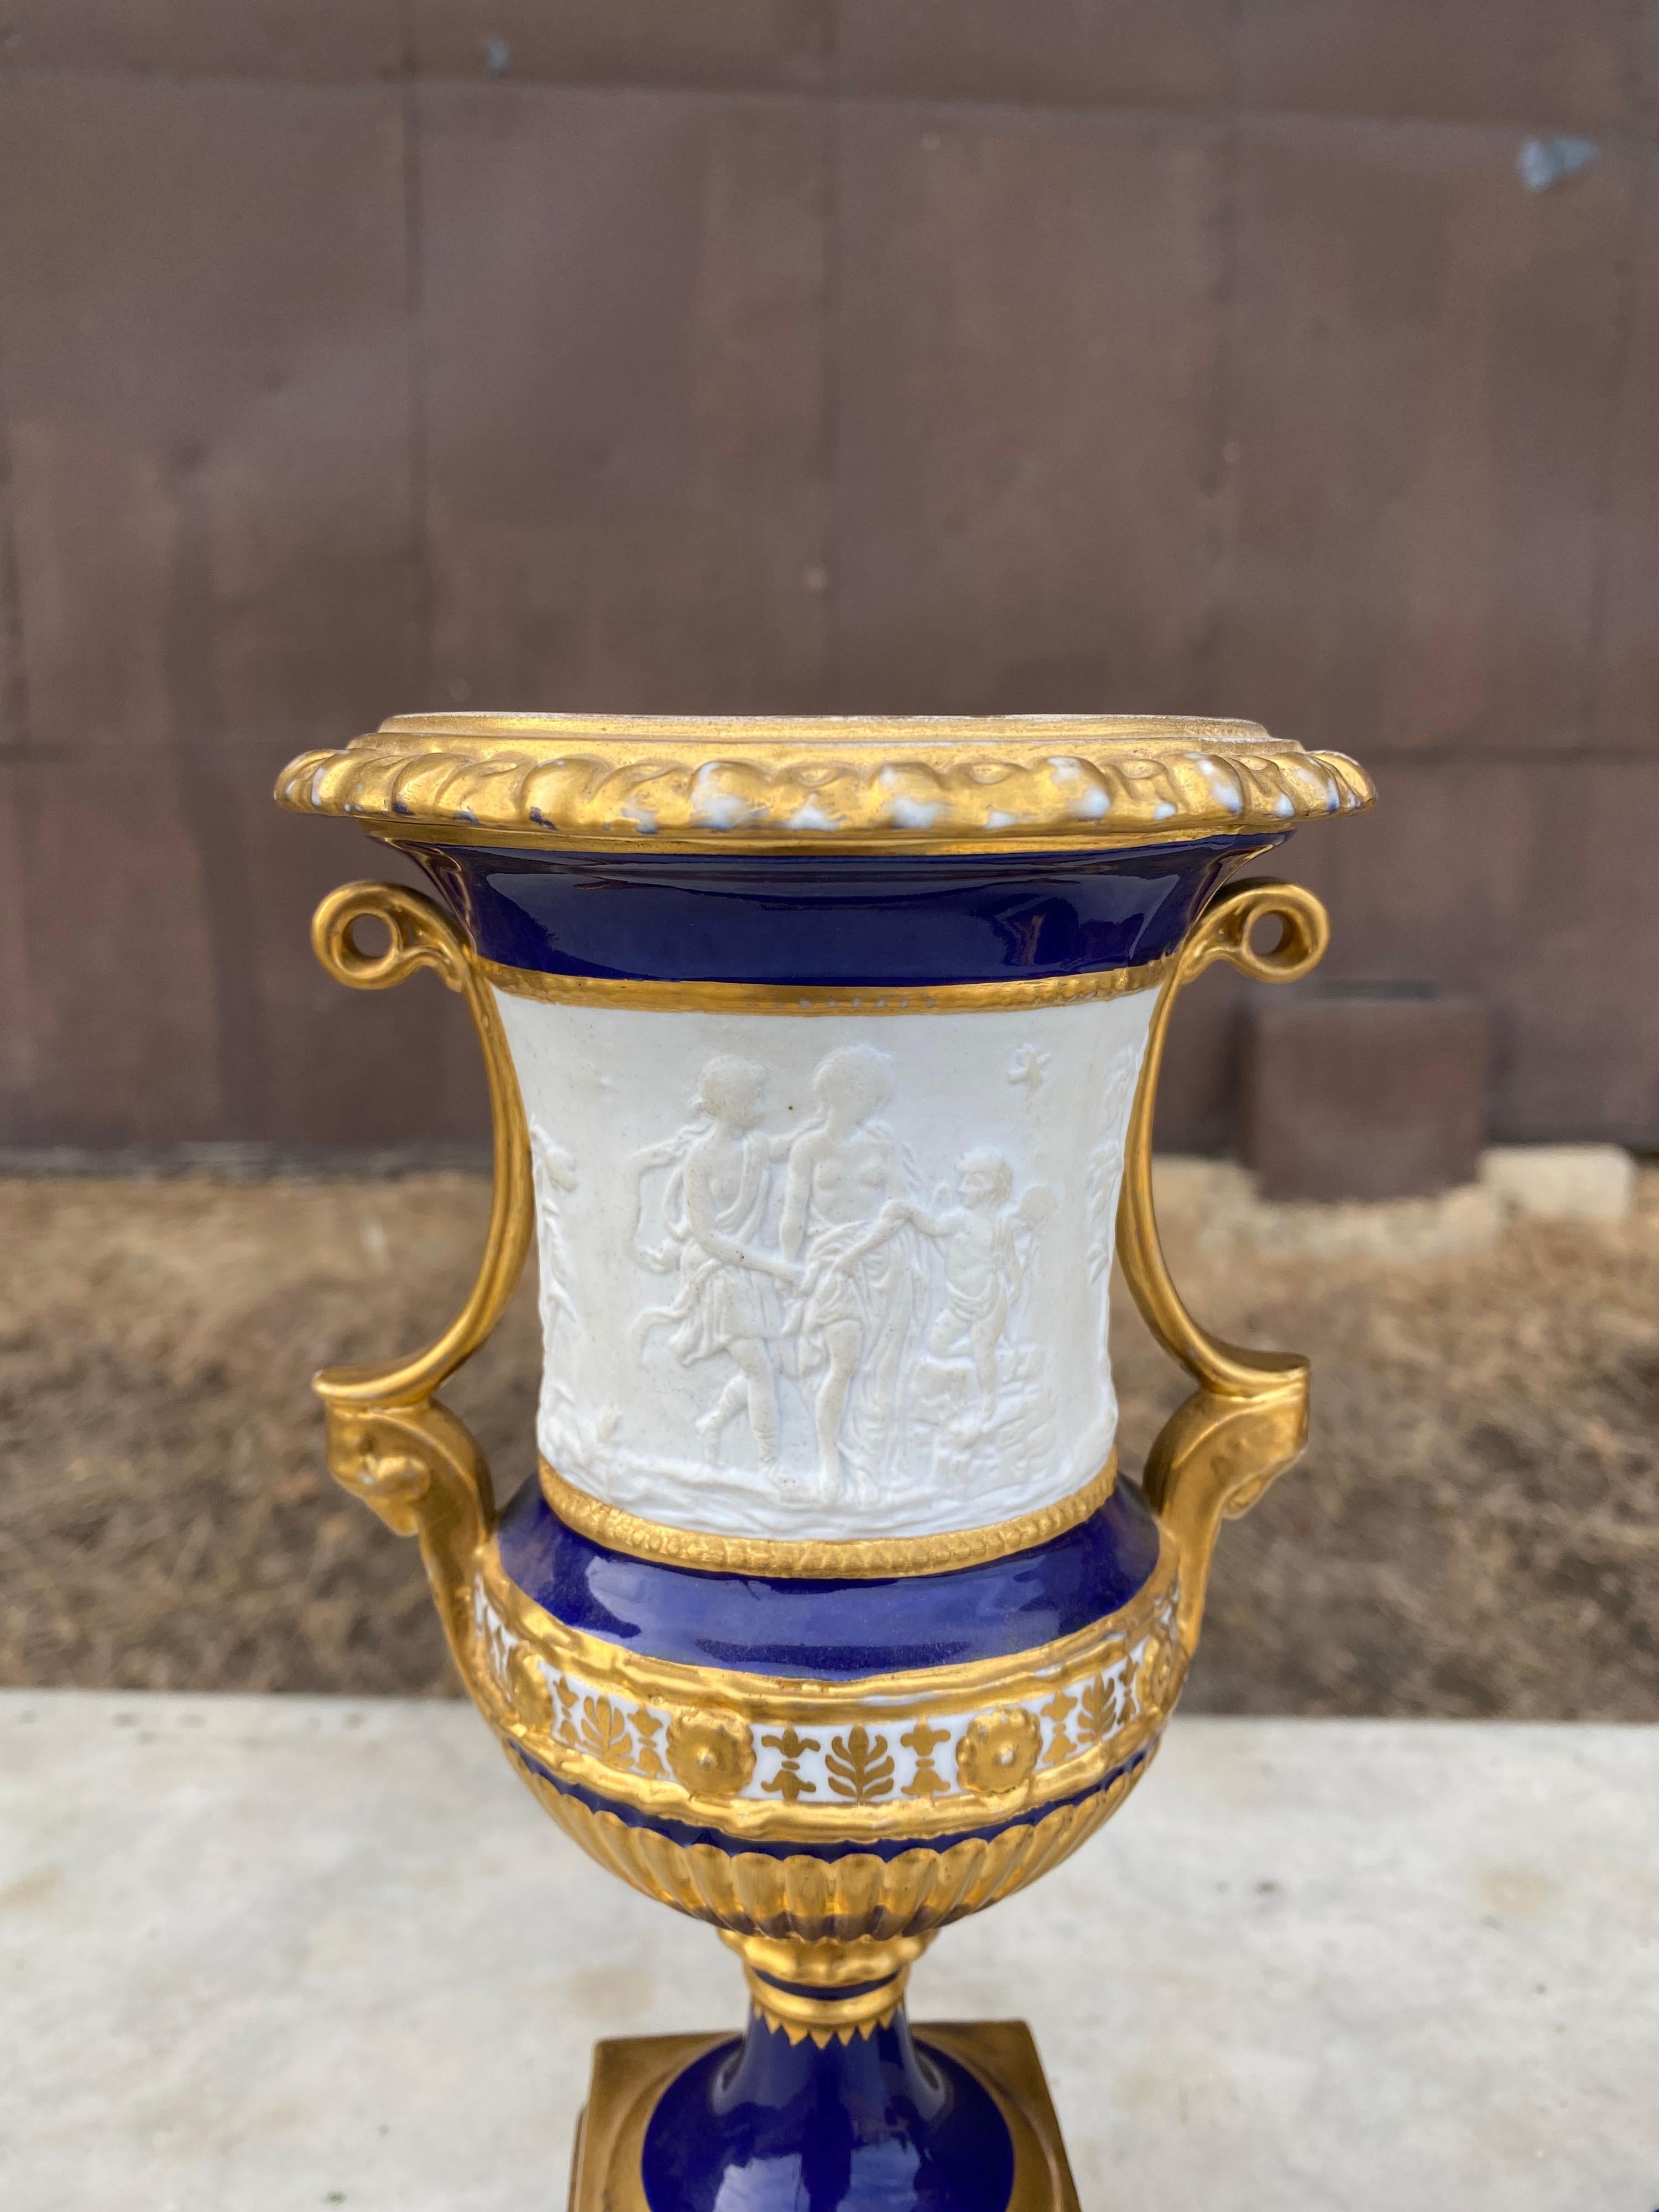 Attractive pair of 19th century French porcelain urns with 
Neoclassical scenes. The urns are parcel gilt decorated.